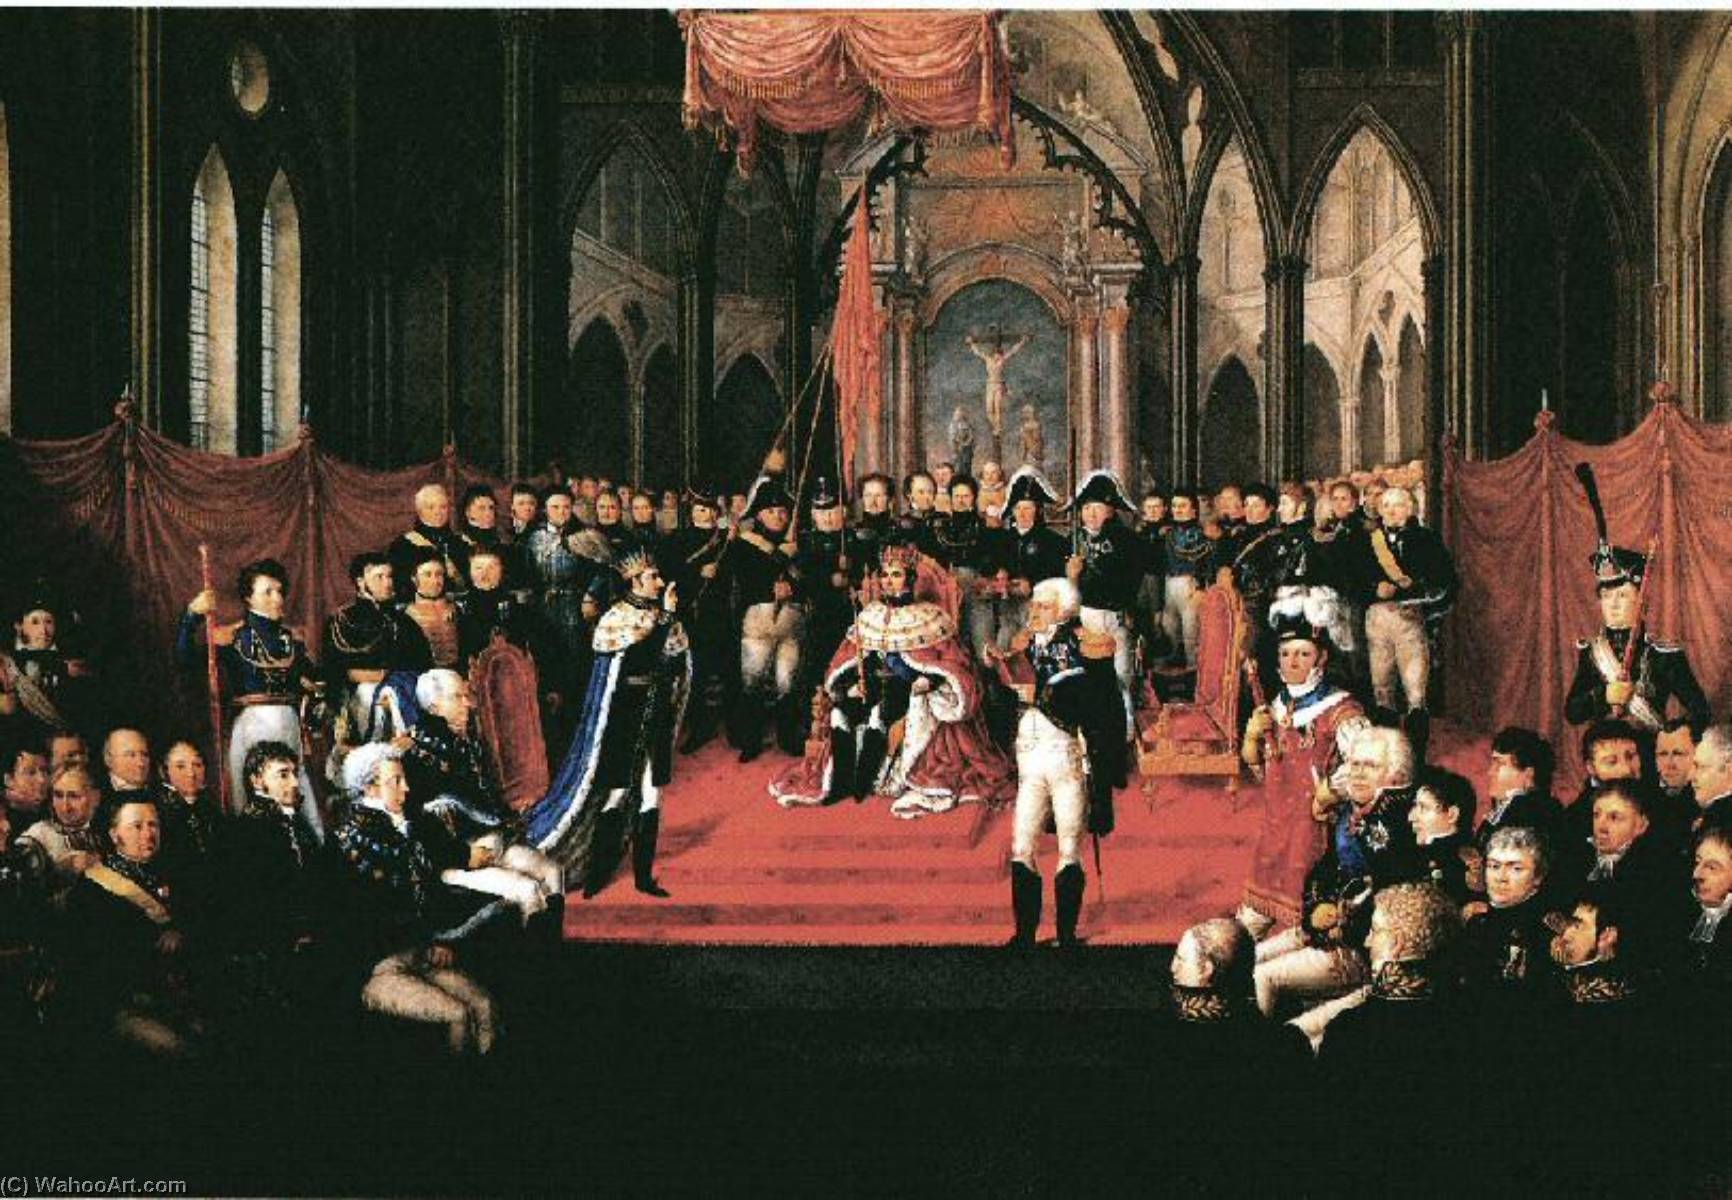 WikiOO.org - Enciclopedia of Fine Arts - Pictura, lucrări de artă Jacob Munch - Coronation of Carl XIV Johan of Norway and Sweden in Nidaros Cathedral 1818